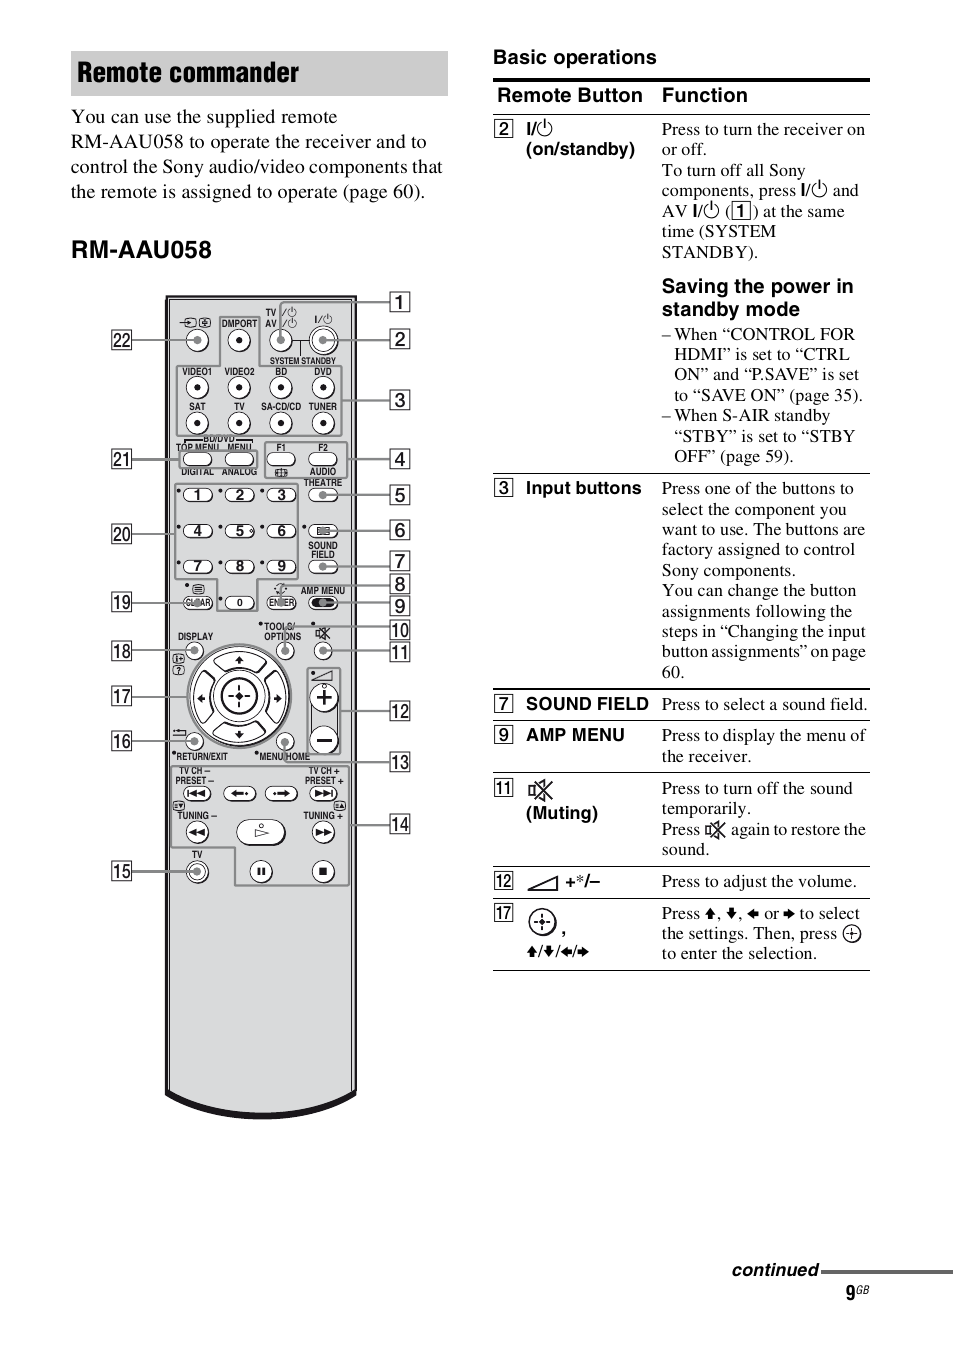 Remote commander, Rm-aau058, Basic operations | Sony 4-130-031-11(3) User  Manual | Page 9 / 72